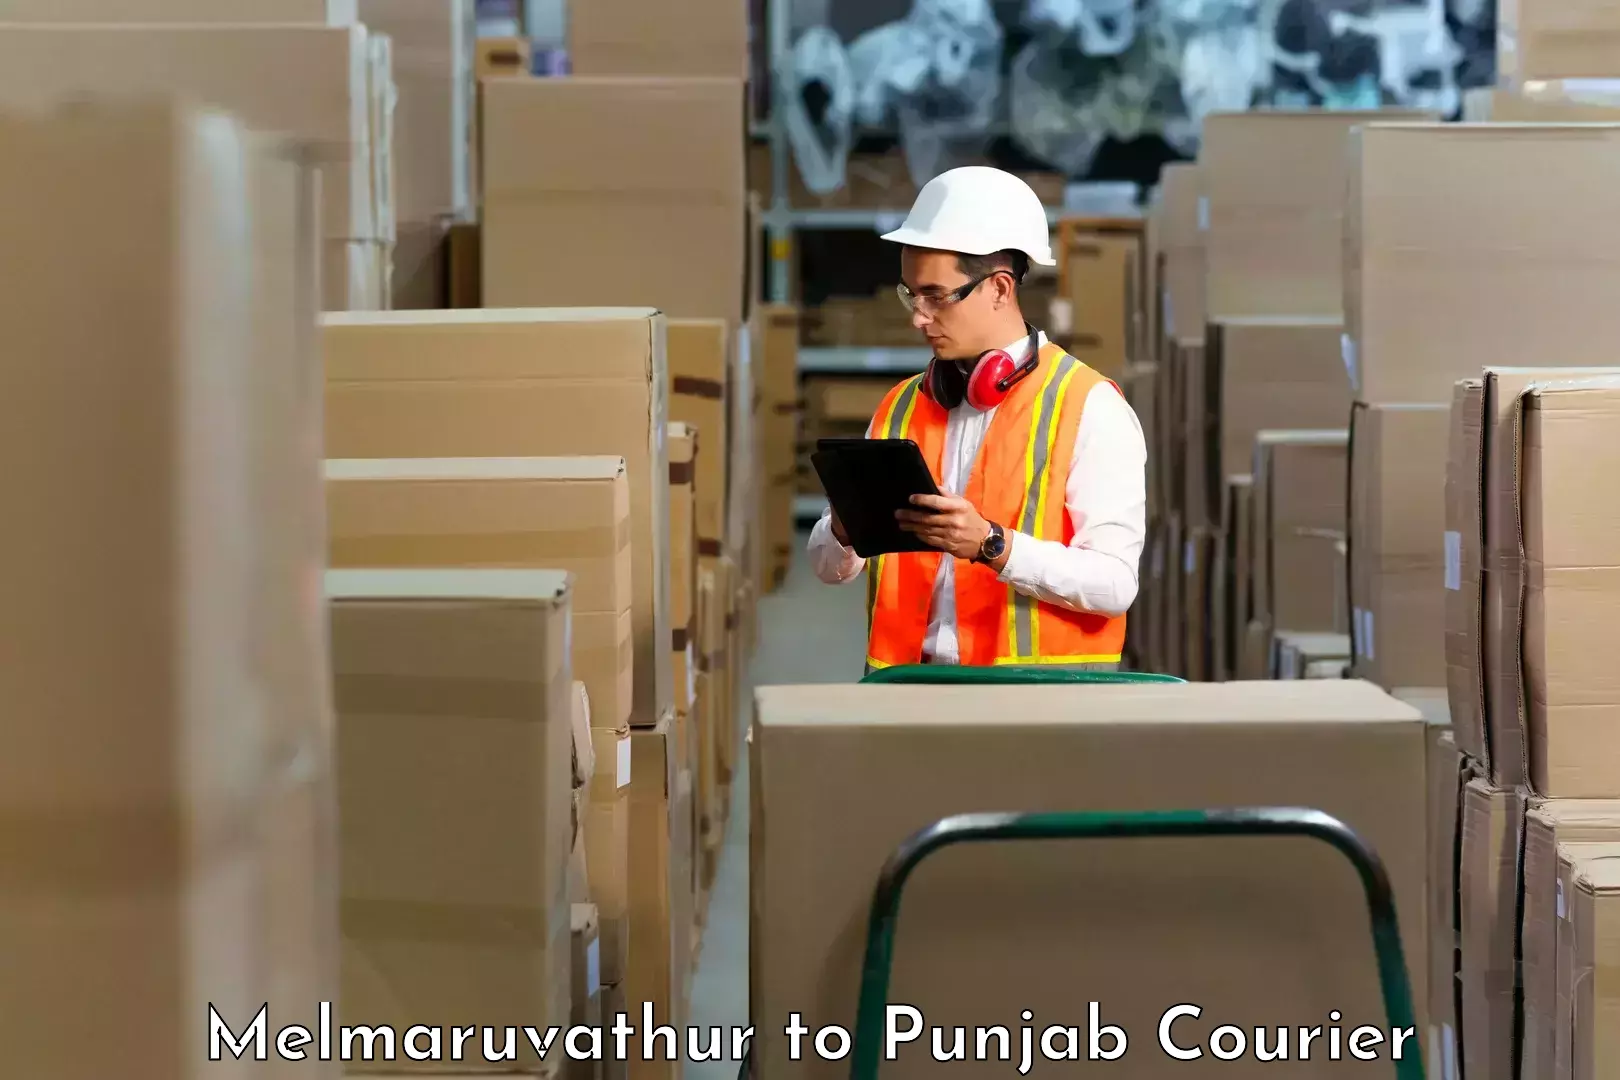 Reliable shipping partners Melmaruvathur to Mohali